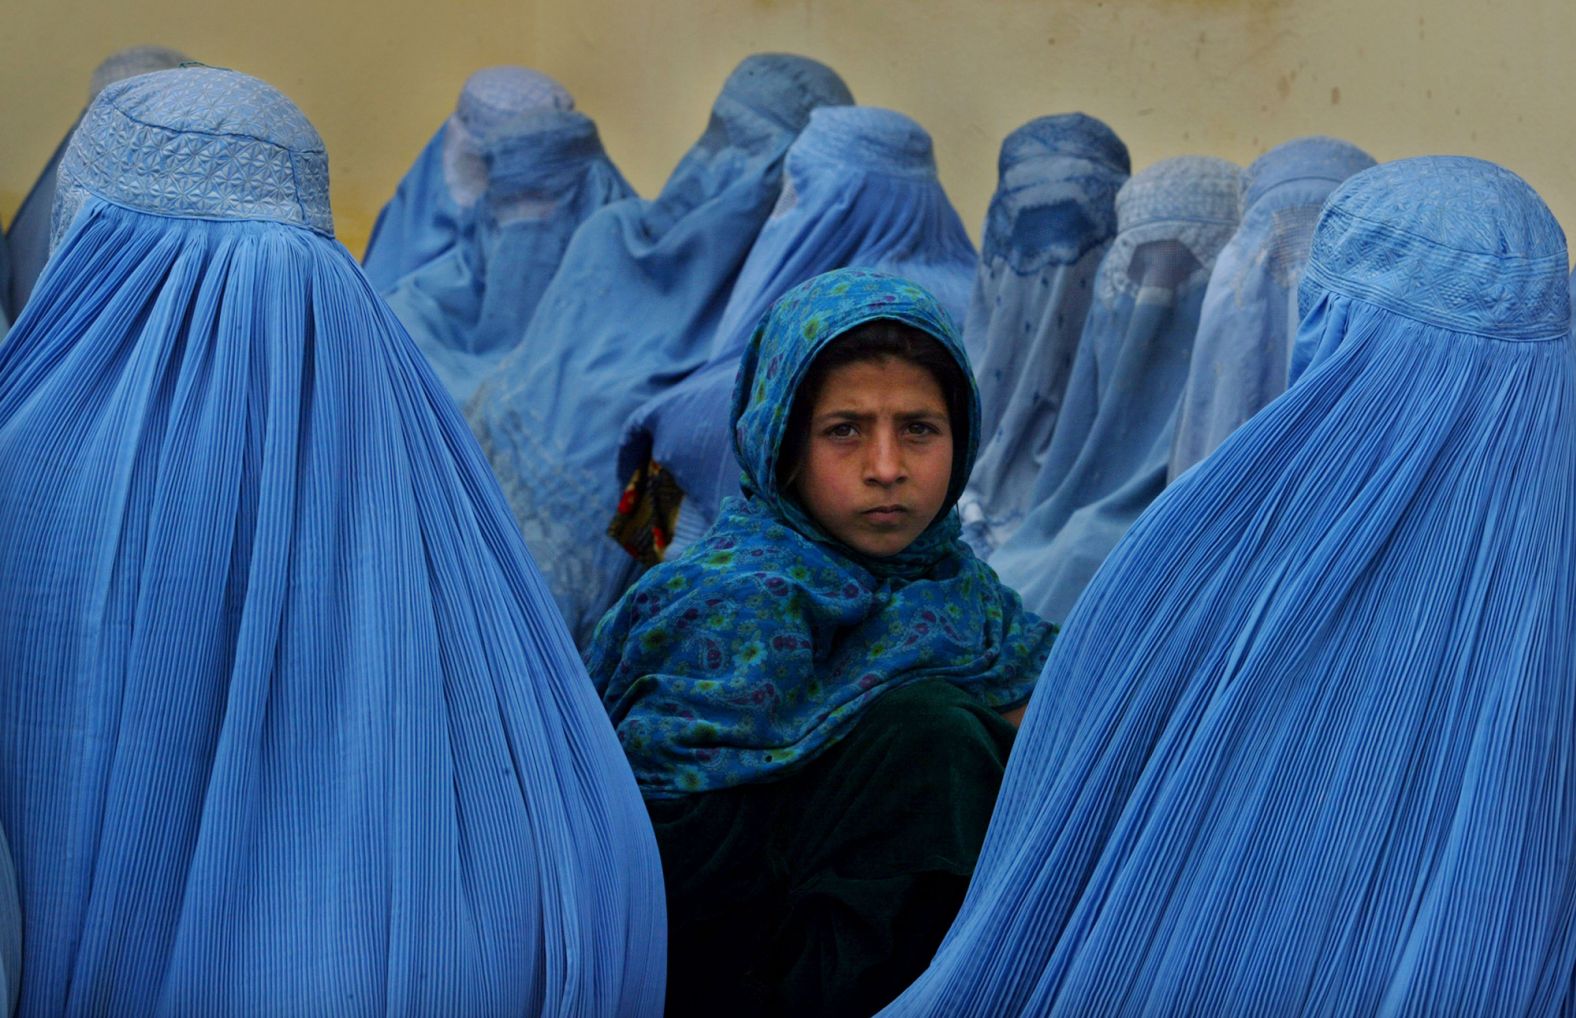 Women wait in line to be treated at a health clinic in Kalakan, Afghanistan, in February 2003.